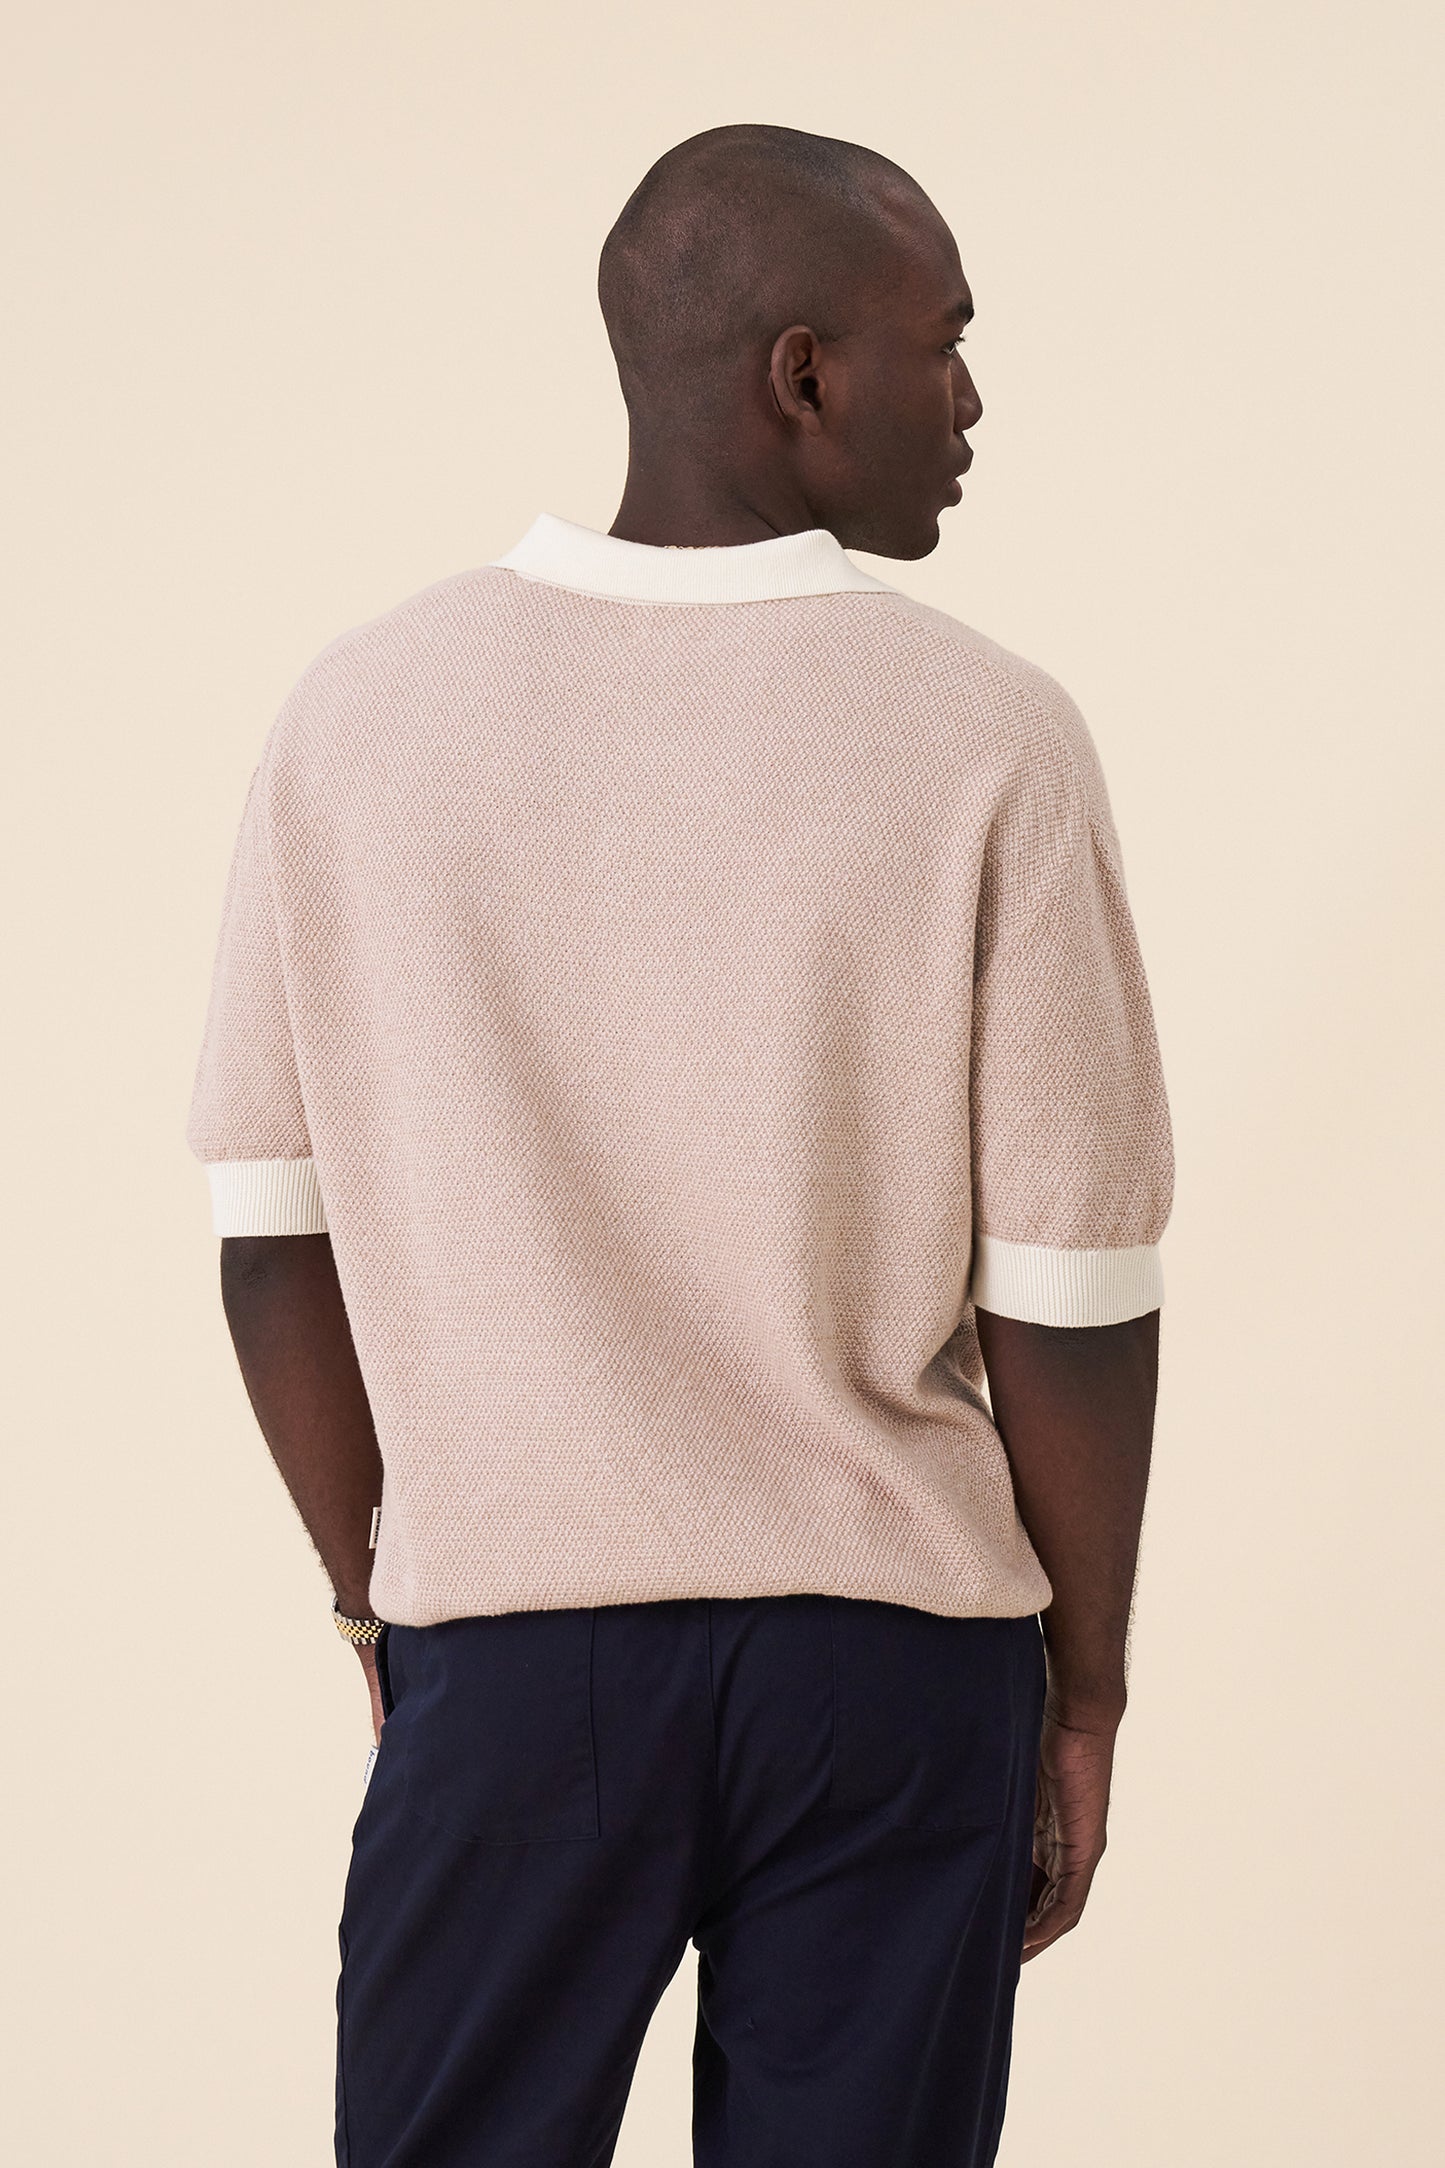 TEXTURED KNIT POLO - OATMEAL